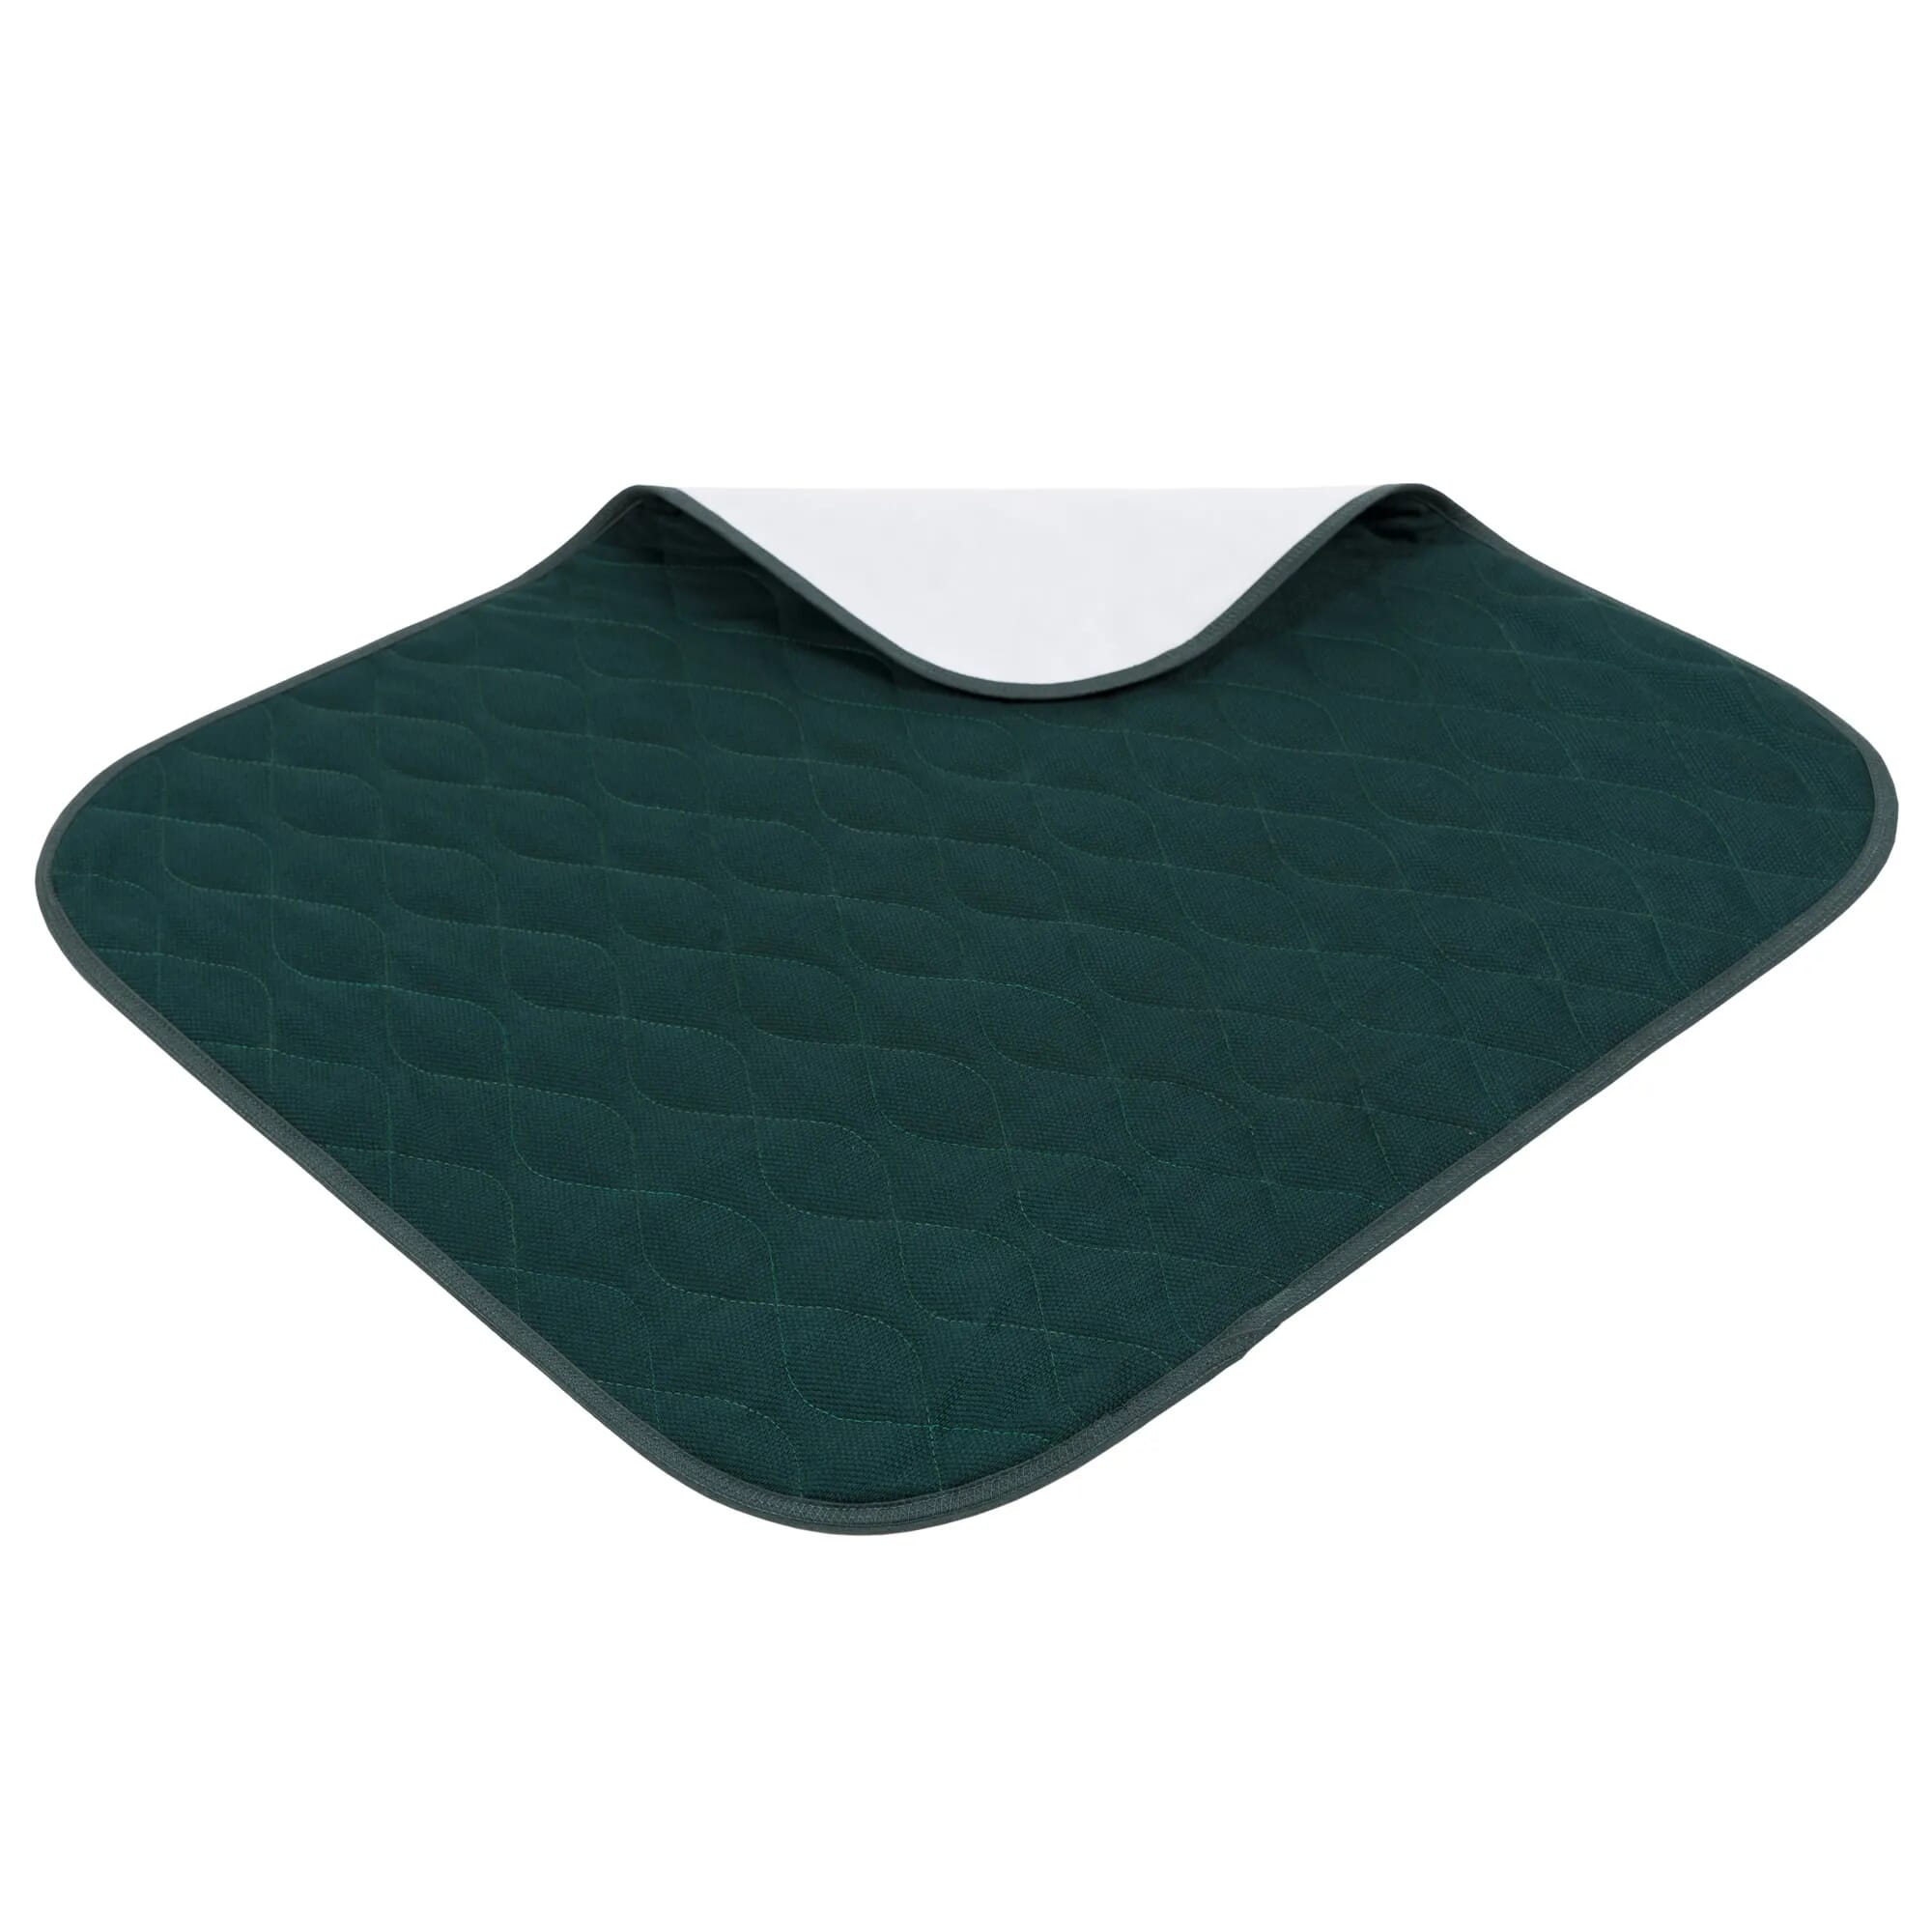 View Washable Chair Pads Green information